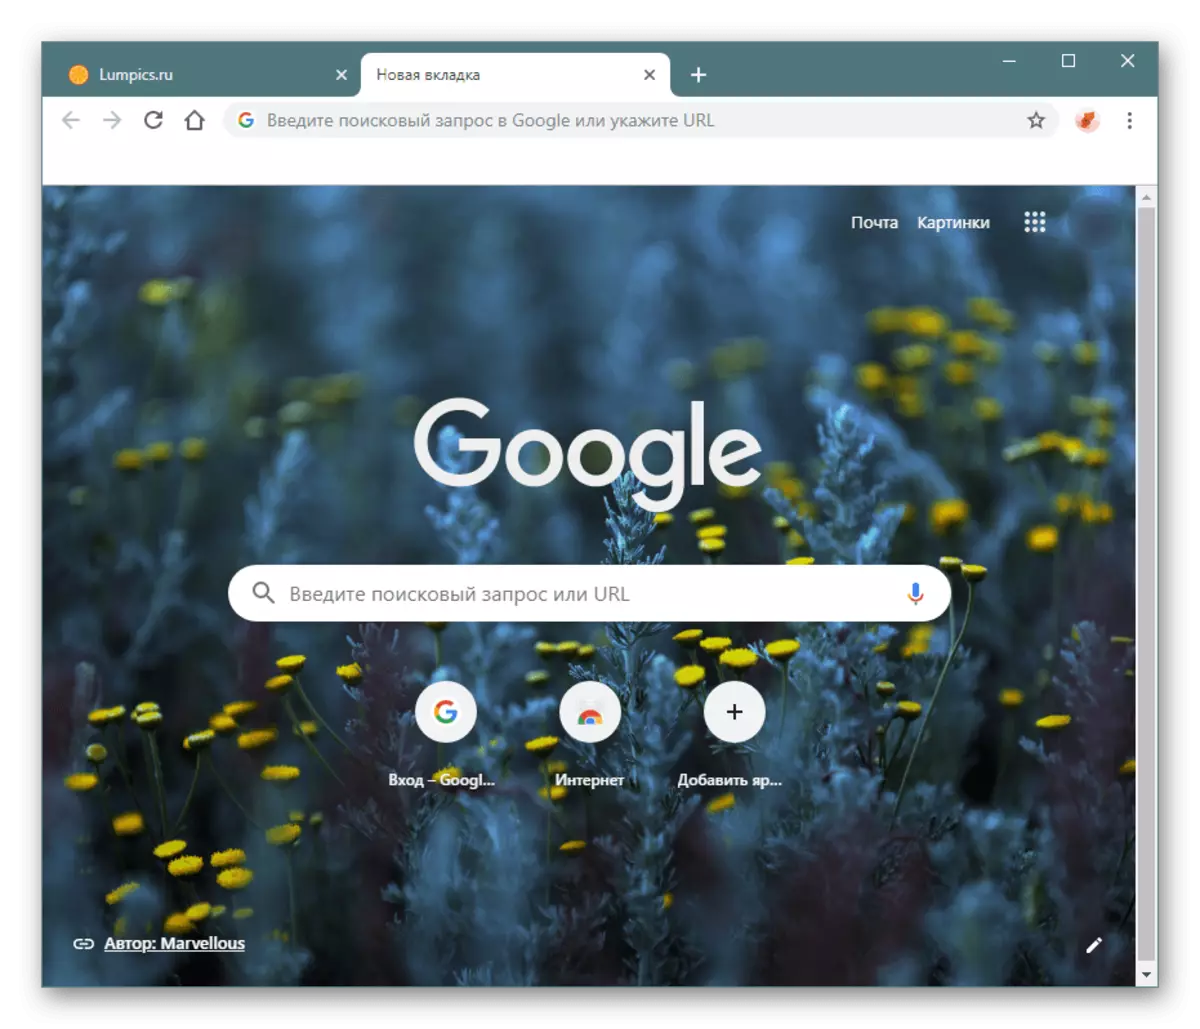 Mounted Background on the main page in Google Chrome